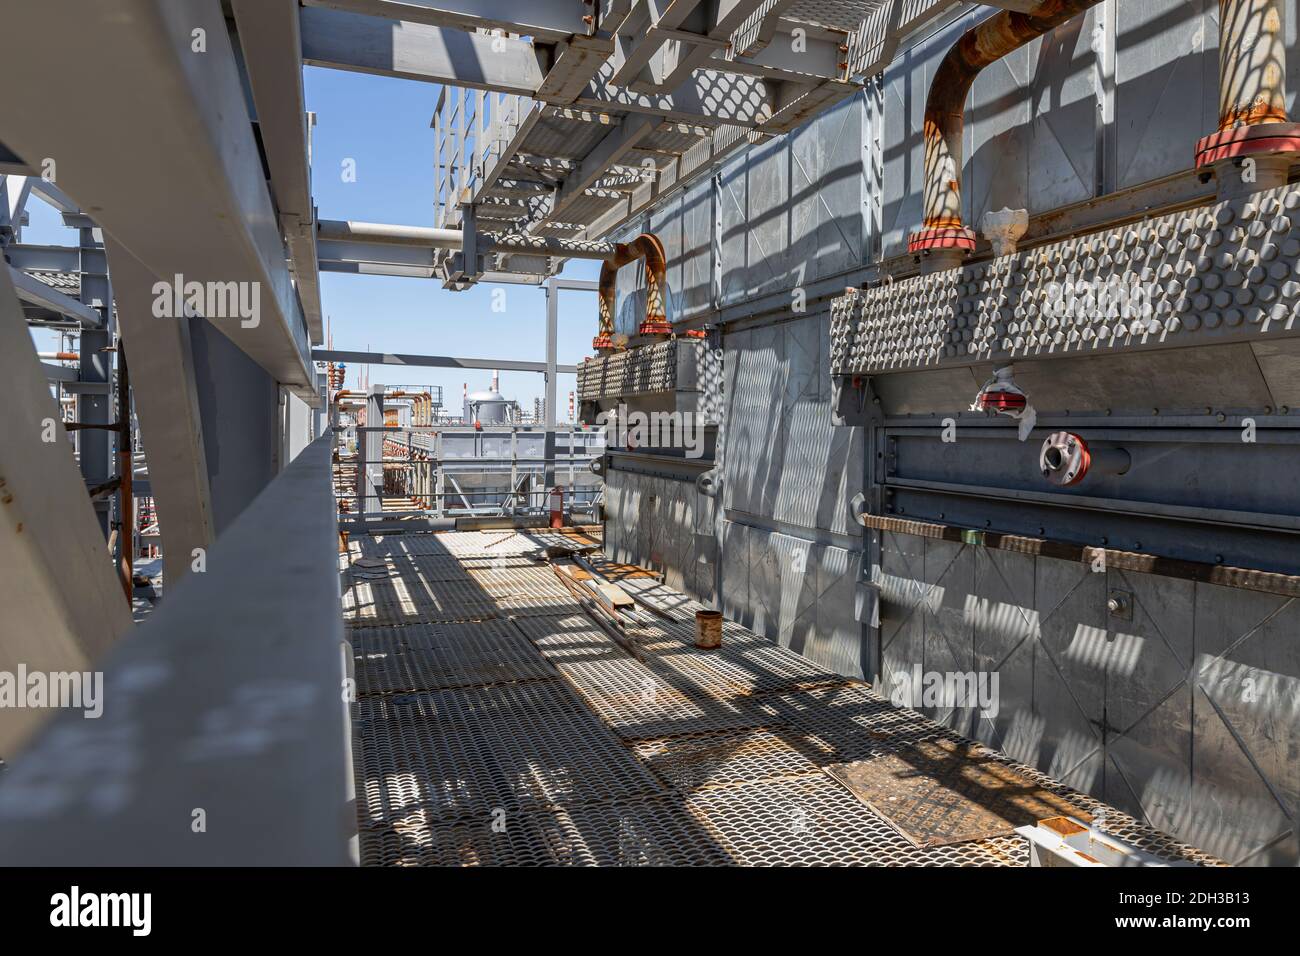 Site for servicing heat exchangers at an oil refining Stock Photo